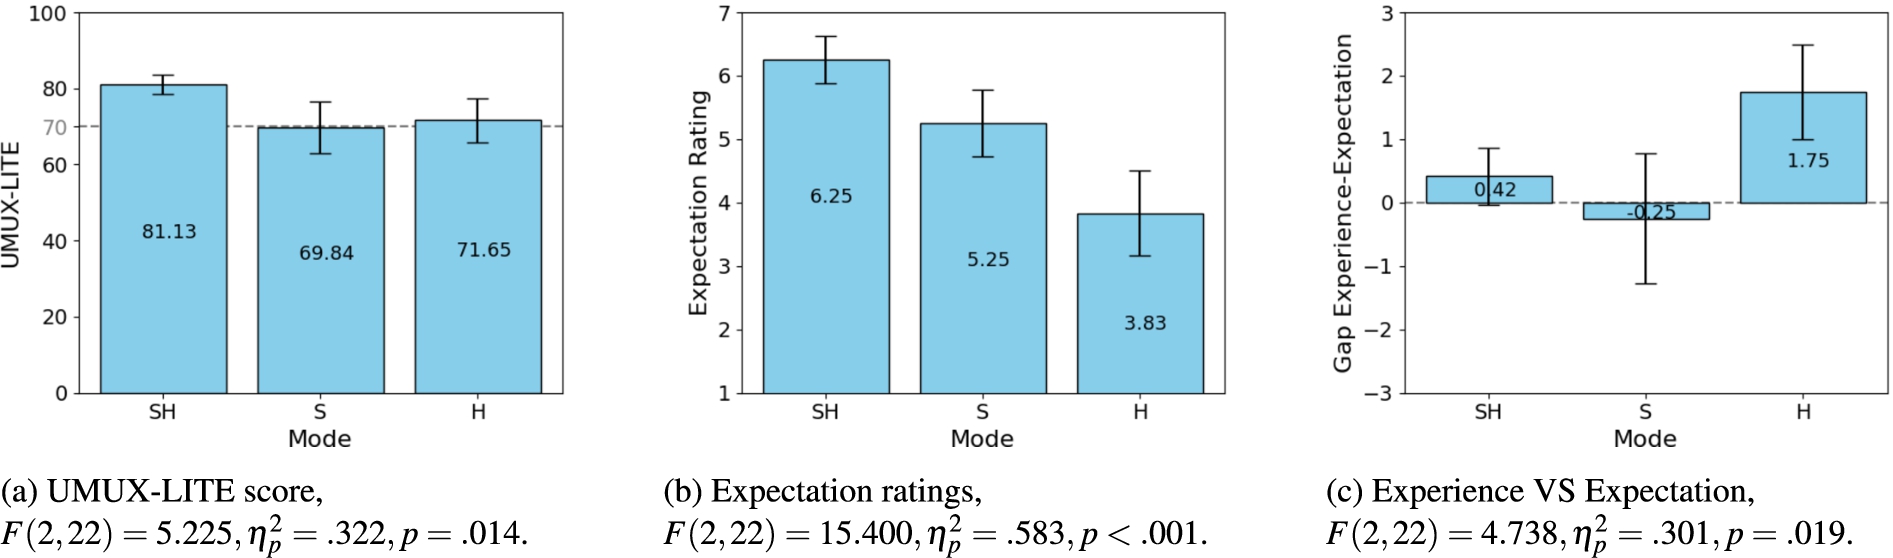 Estimated marginal means of the three dependent variables – (a) UMUX-LITE score, (b) expectation ratings, and (c) gap between experience and expectation ratings – for the three modes SH, S, and H with error bars for 95% confidence intervals. The initial study shows that all of the dependent variables differed across the three modes.